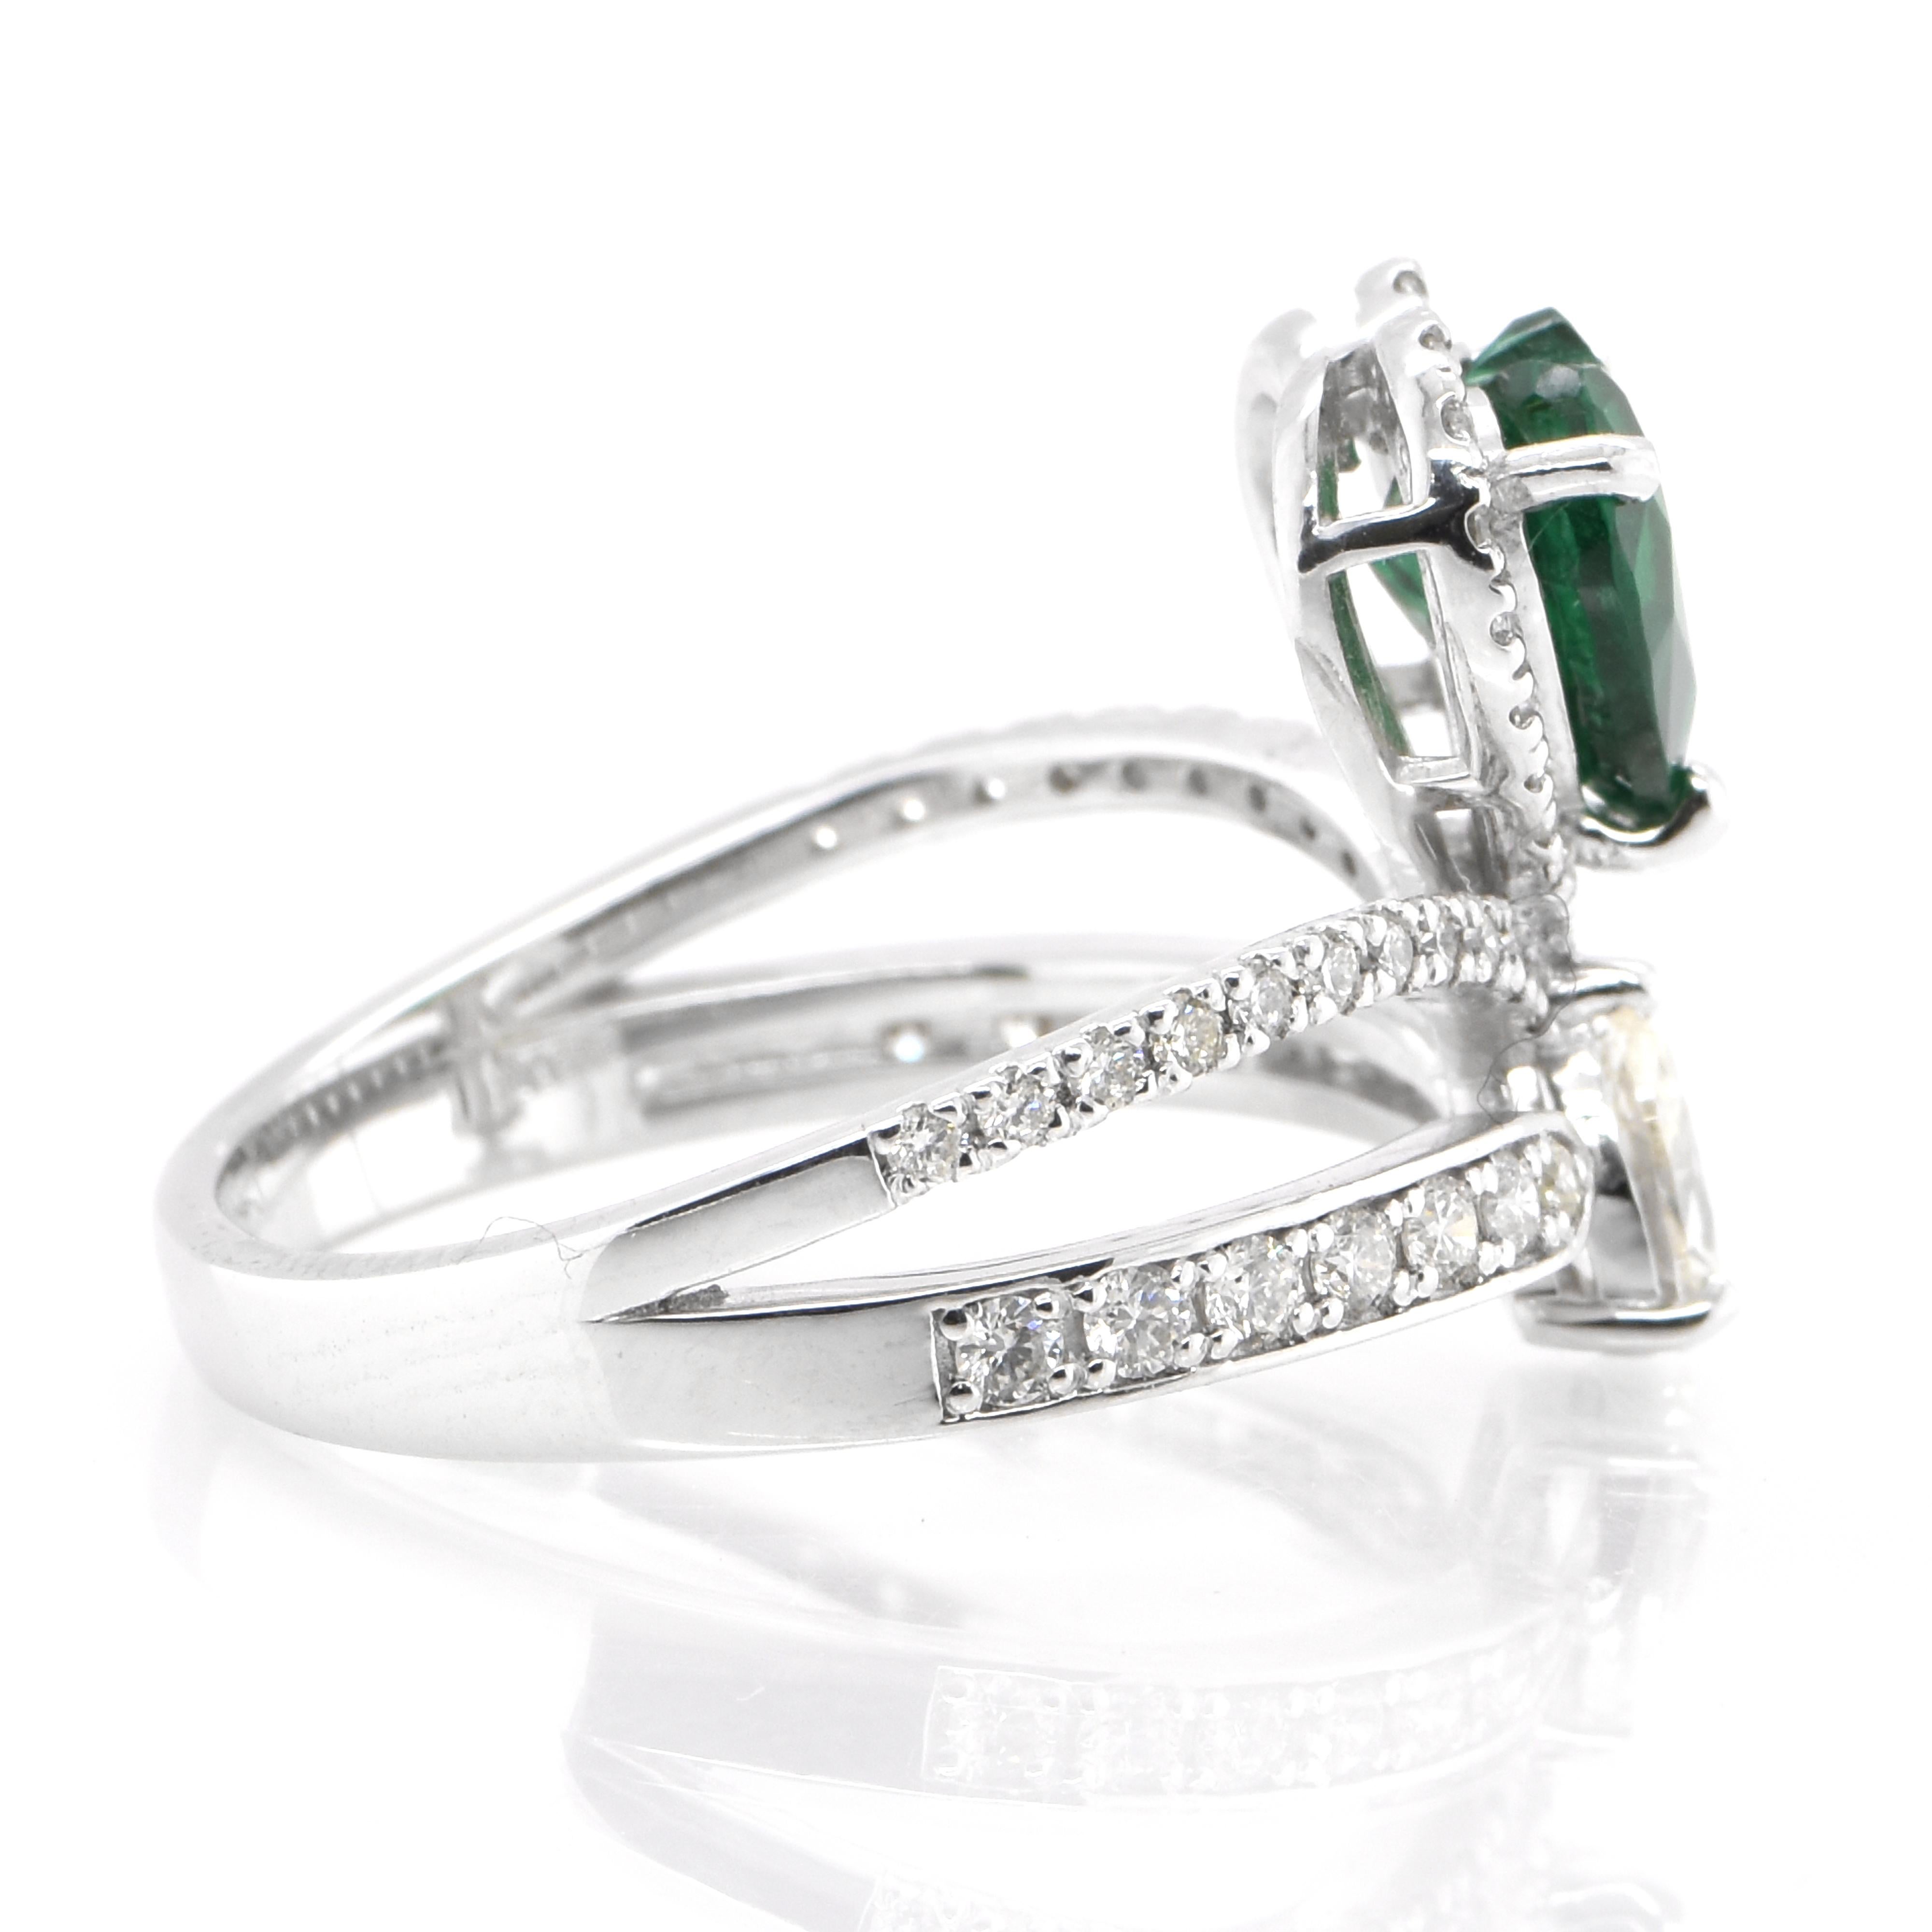 Heart Cut 1.07 Carat Natural Heart Shape Emerald and Diamond Cocktail Ring Set in Platinum For Sale